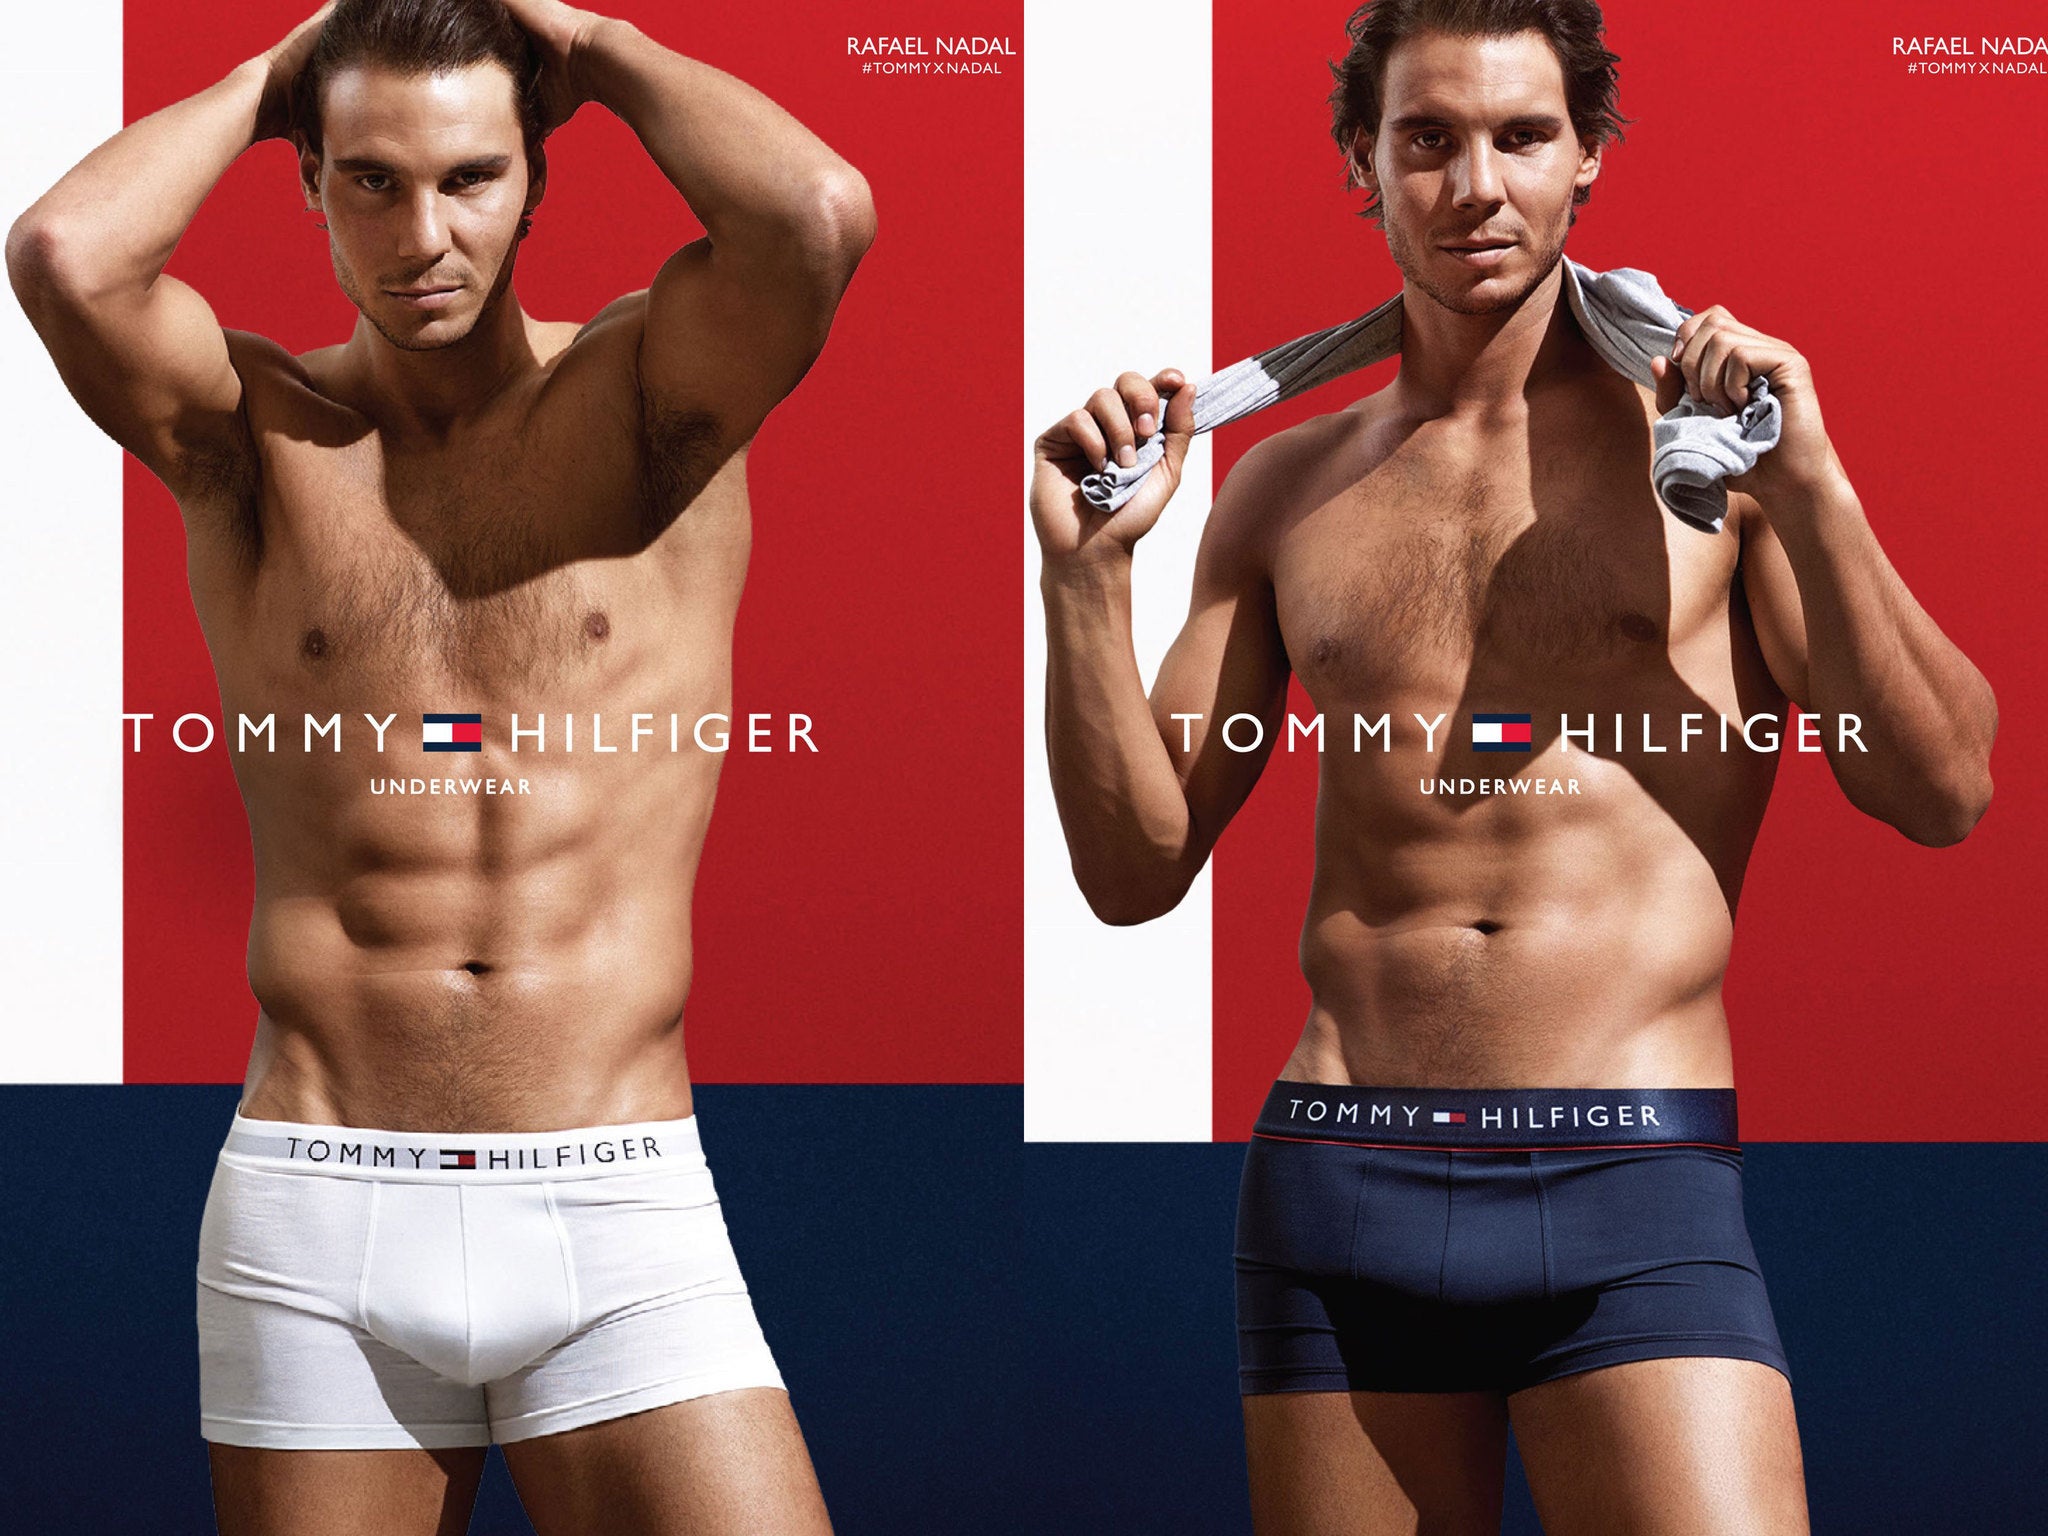 Rafael Nadal strips off in racy ads for Tommy | The Independent | The Independent